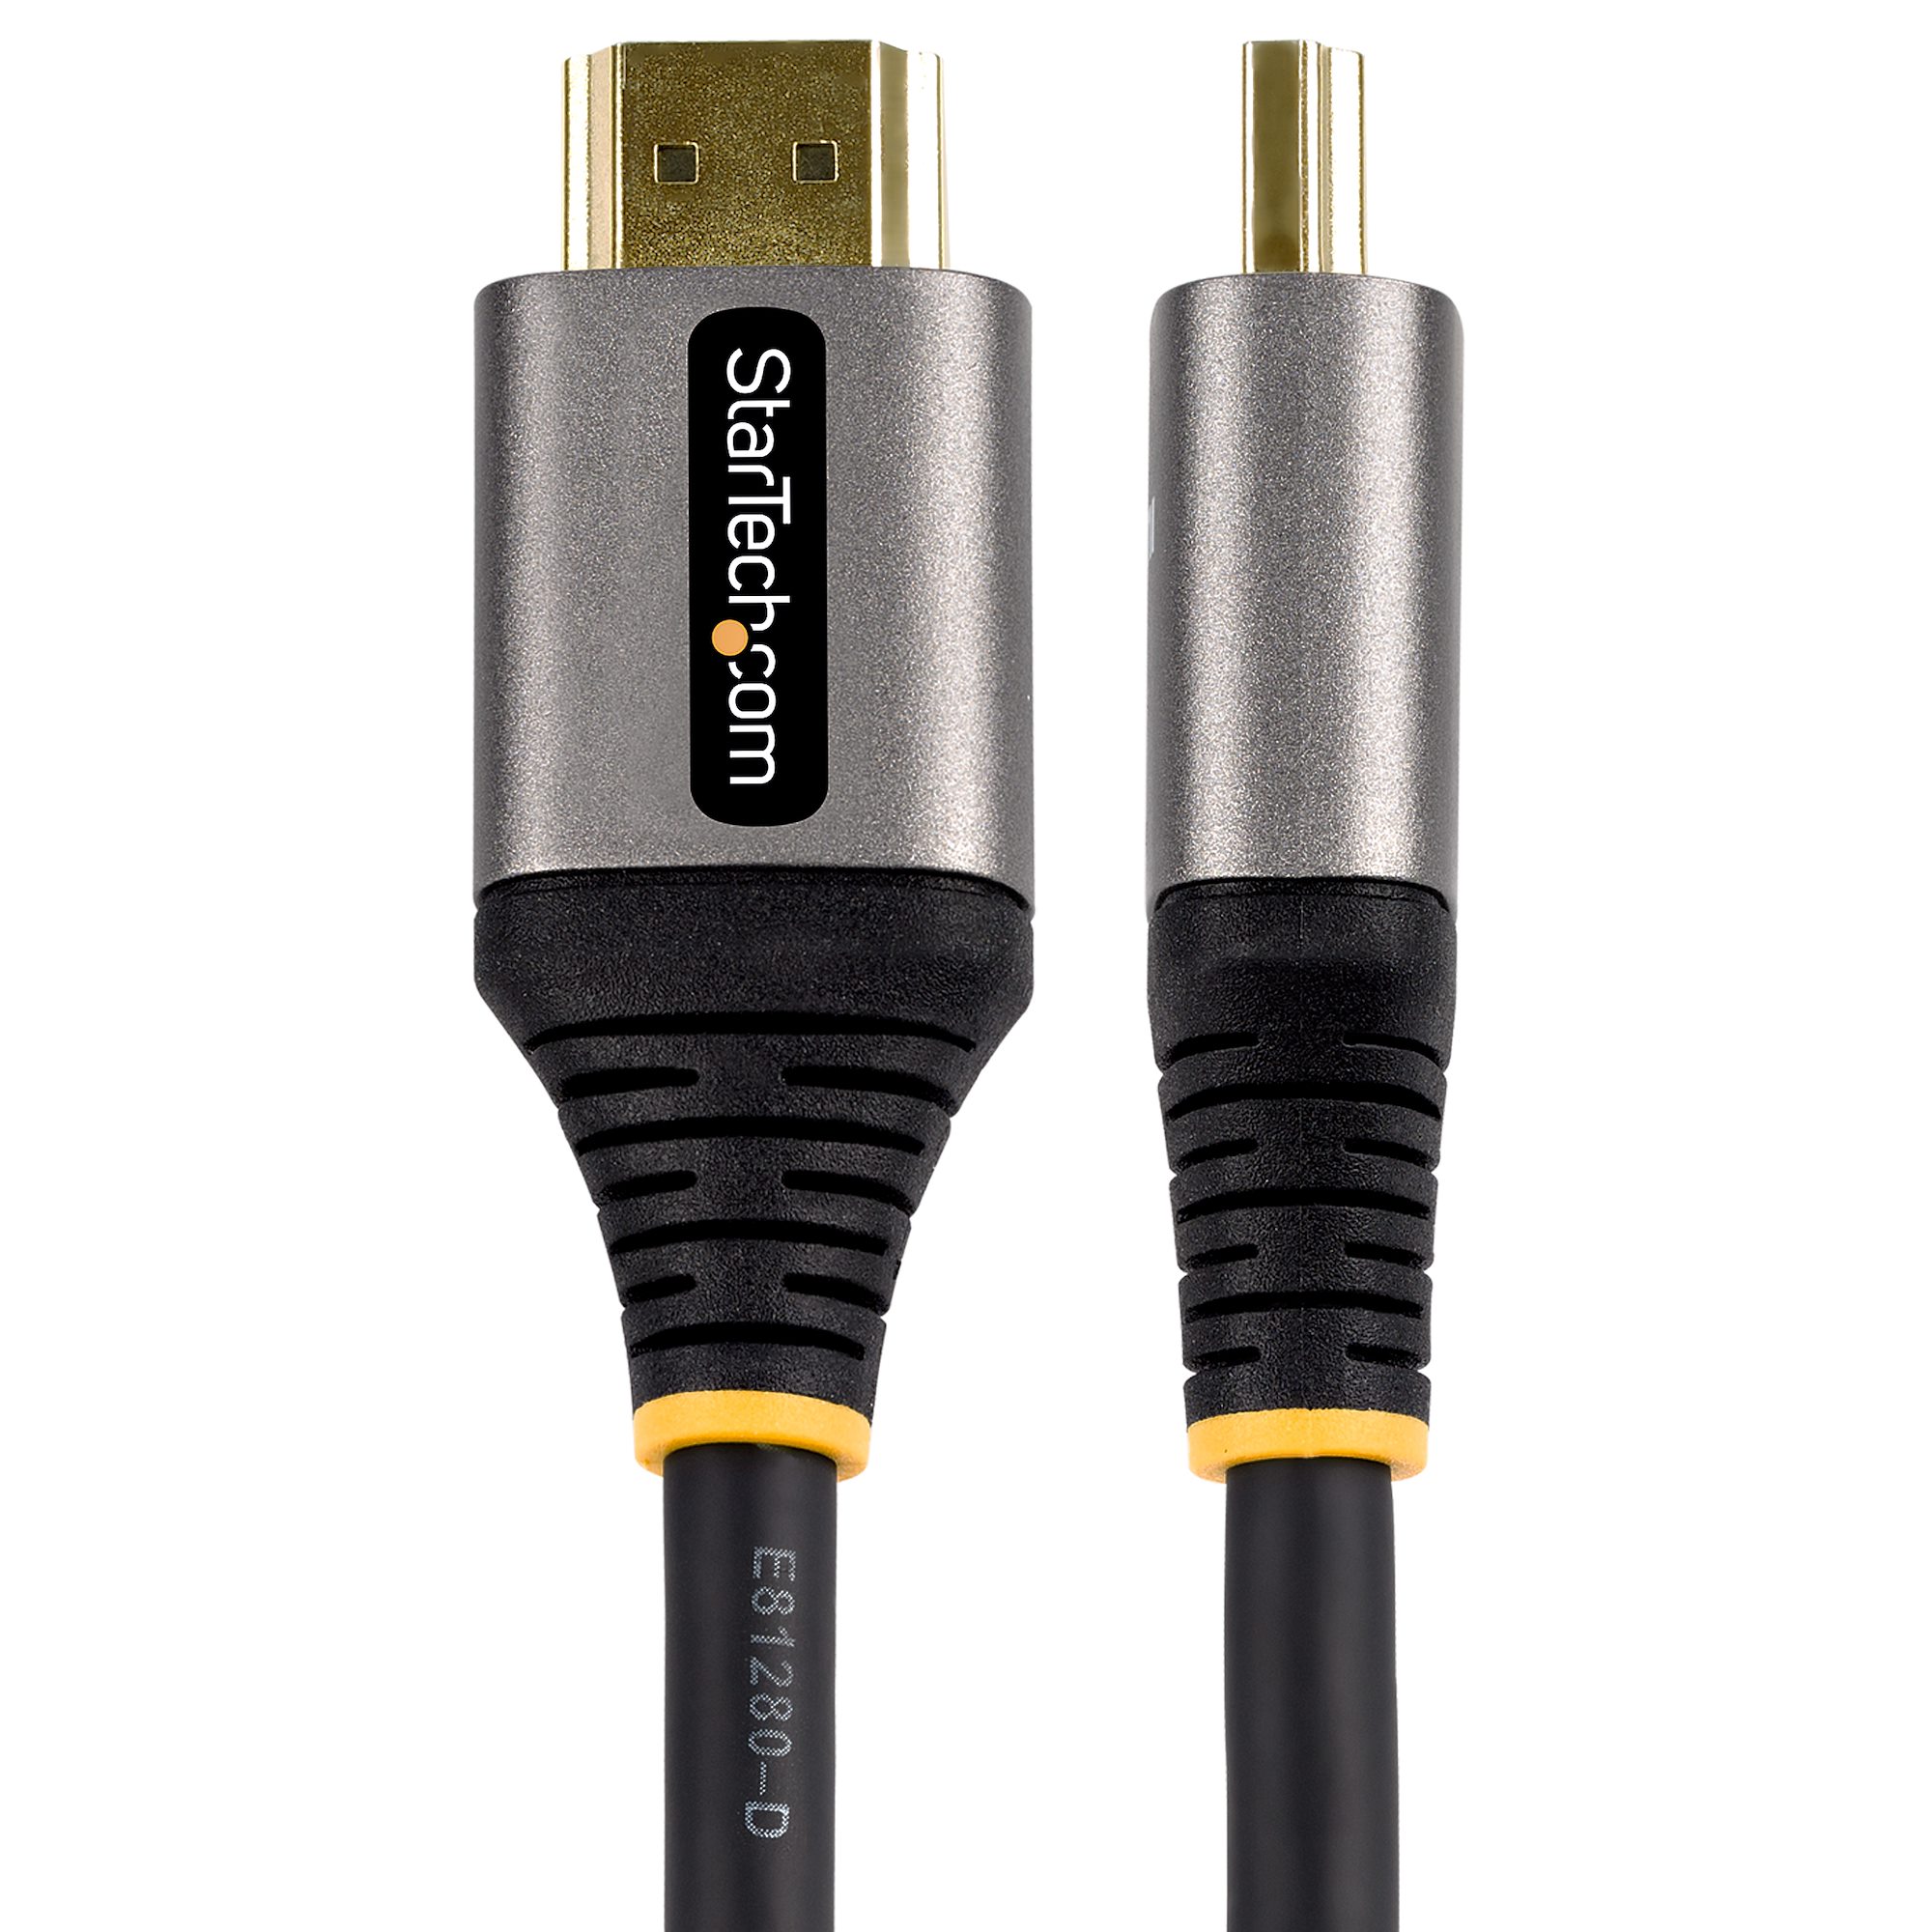  StarTech.com 10ft (3m) HDMI Cable - 4K High Speed HDMI Cable  with Ethernet - UHD 4K 30Hz Video - HDMI 1.4 Cable - Ultra HD HDMI  Monitors, Projectors, TVs & Displays 